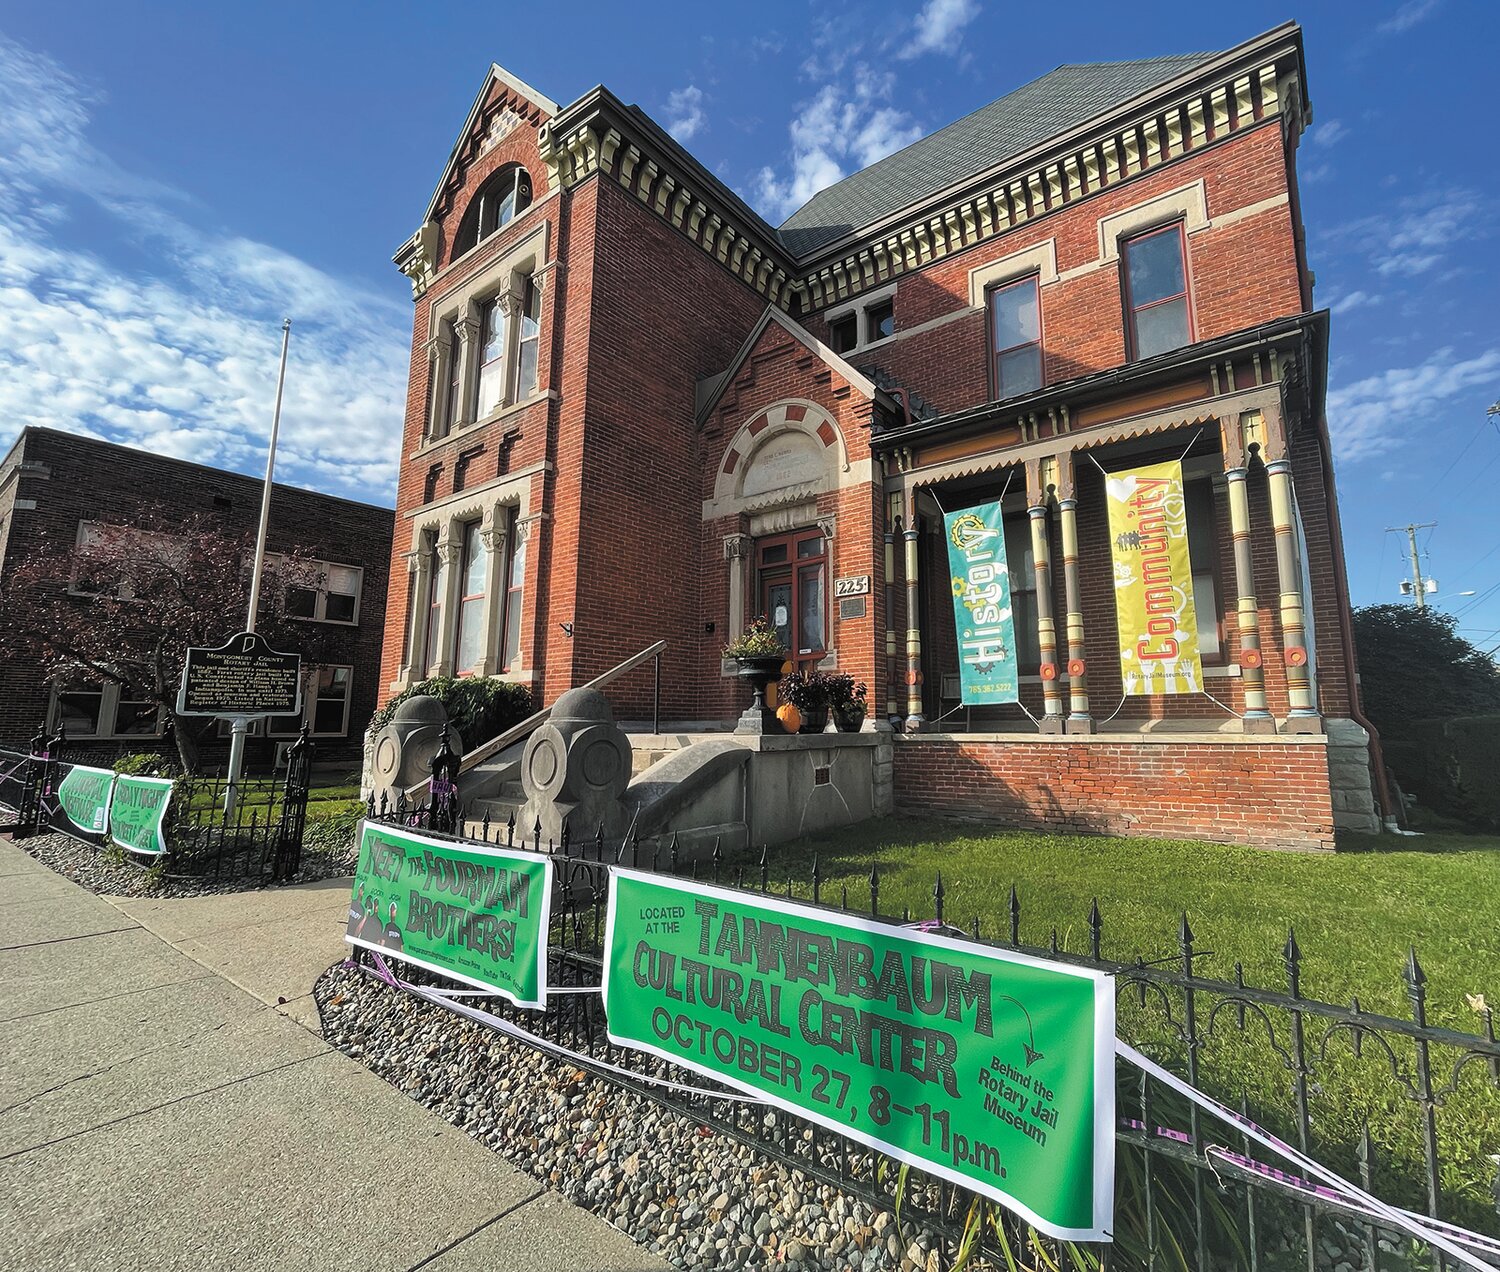 Paranormal investigators, the Fourman Brothers, will visit Crawfordsville from 8 p.m. to 11 p.m. Friday in the Tannenbaum Center behind the RotaryJail Museum. This is a free meet-and-greet event for fans and promotes the episode the brothers recently filmed on the hauntings at the museum.